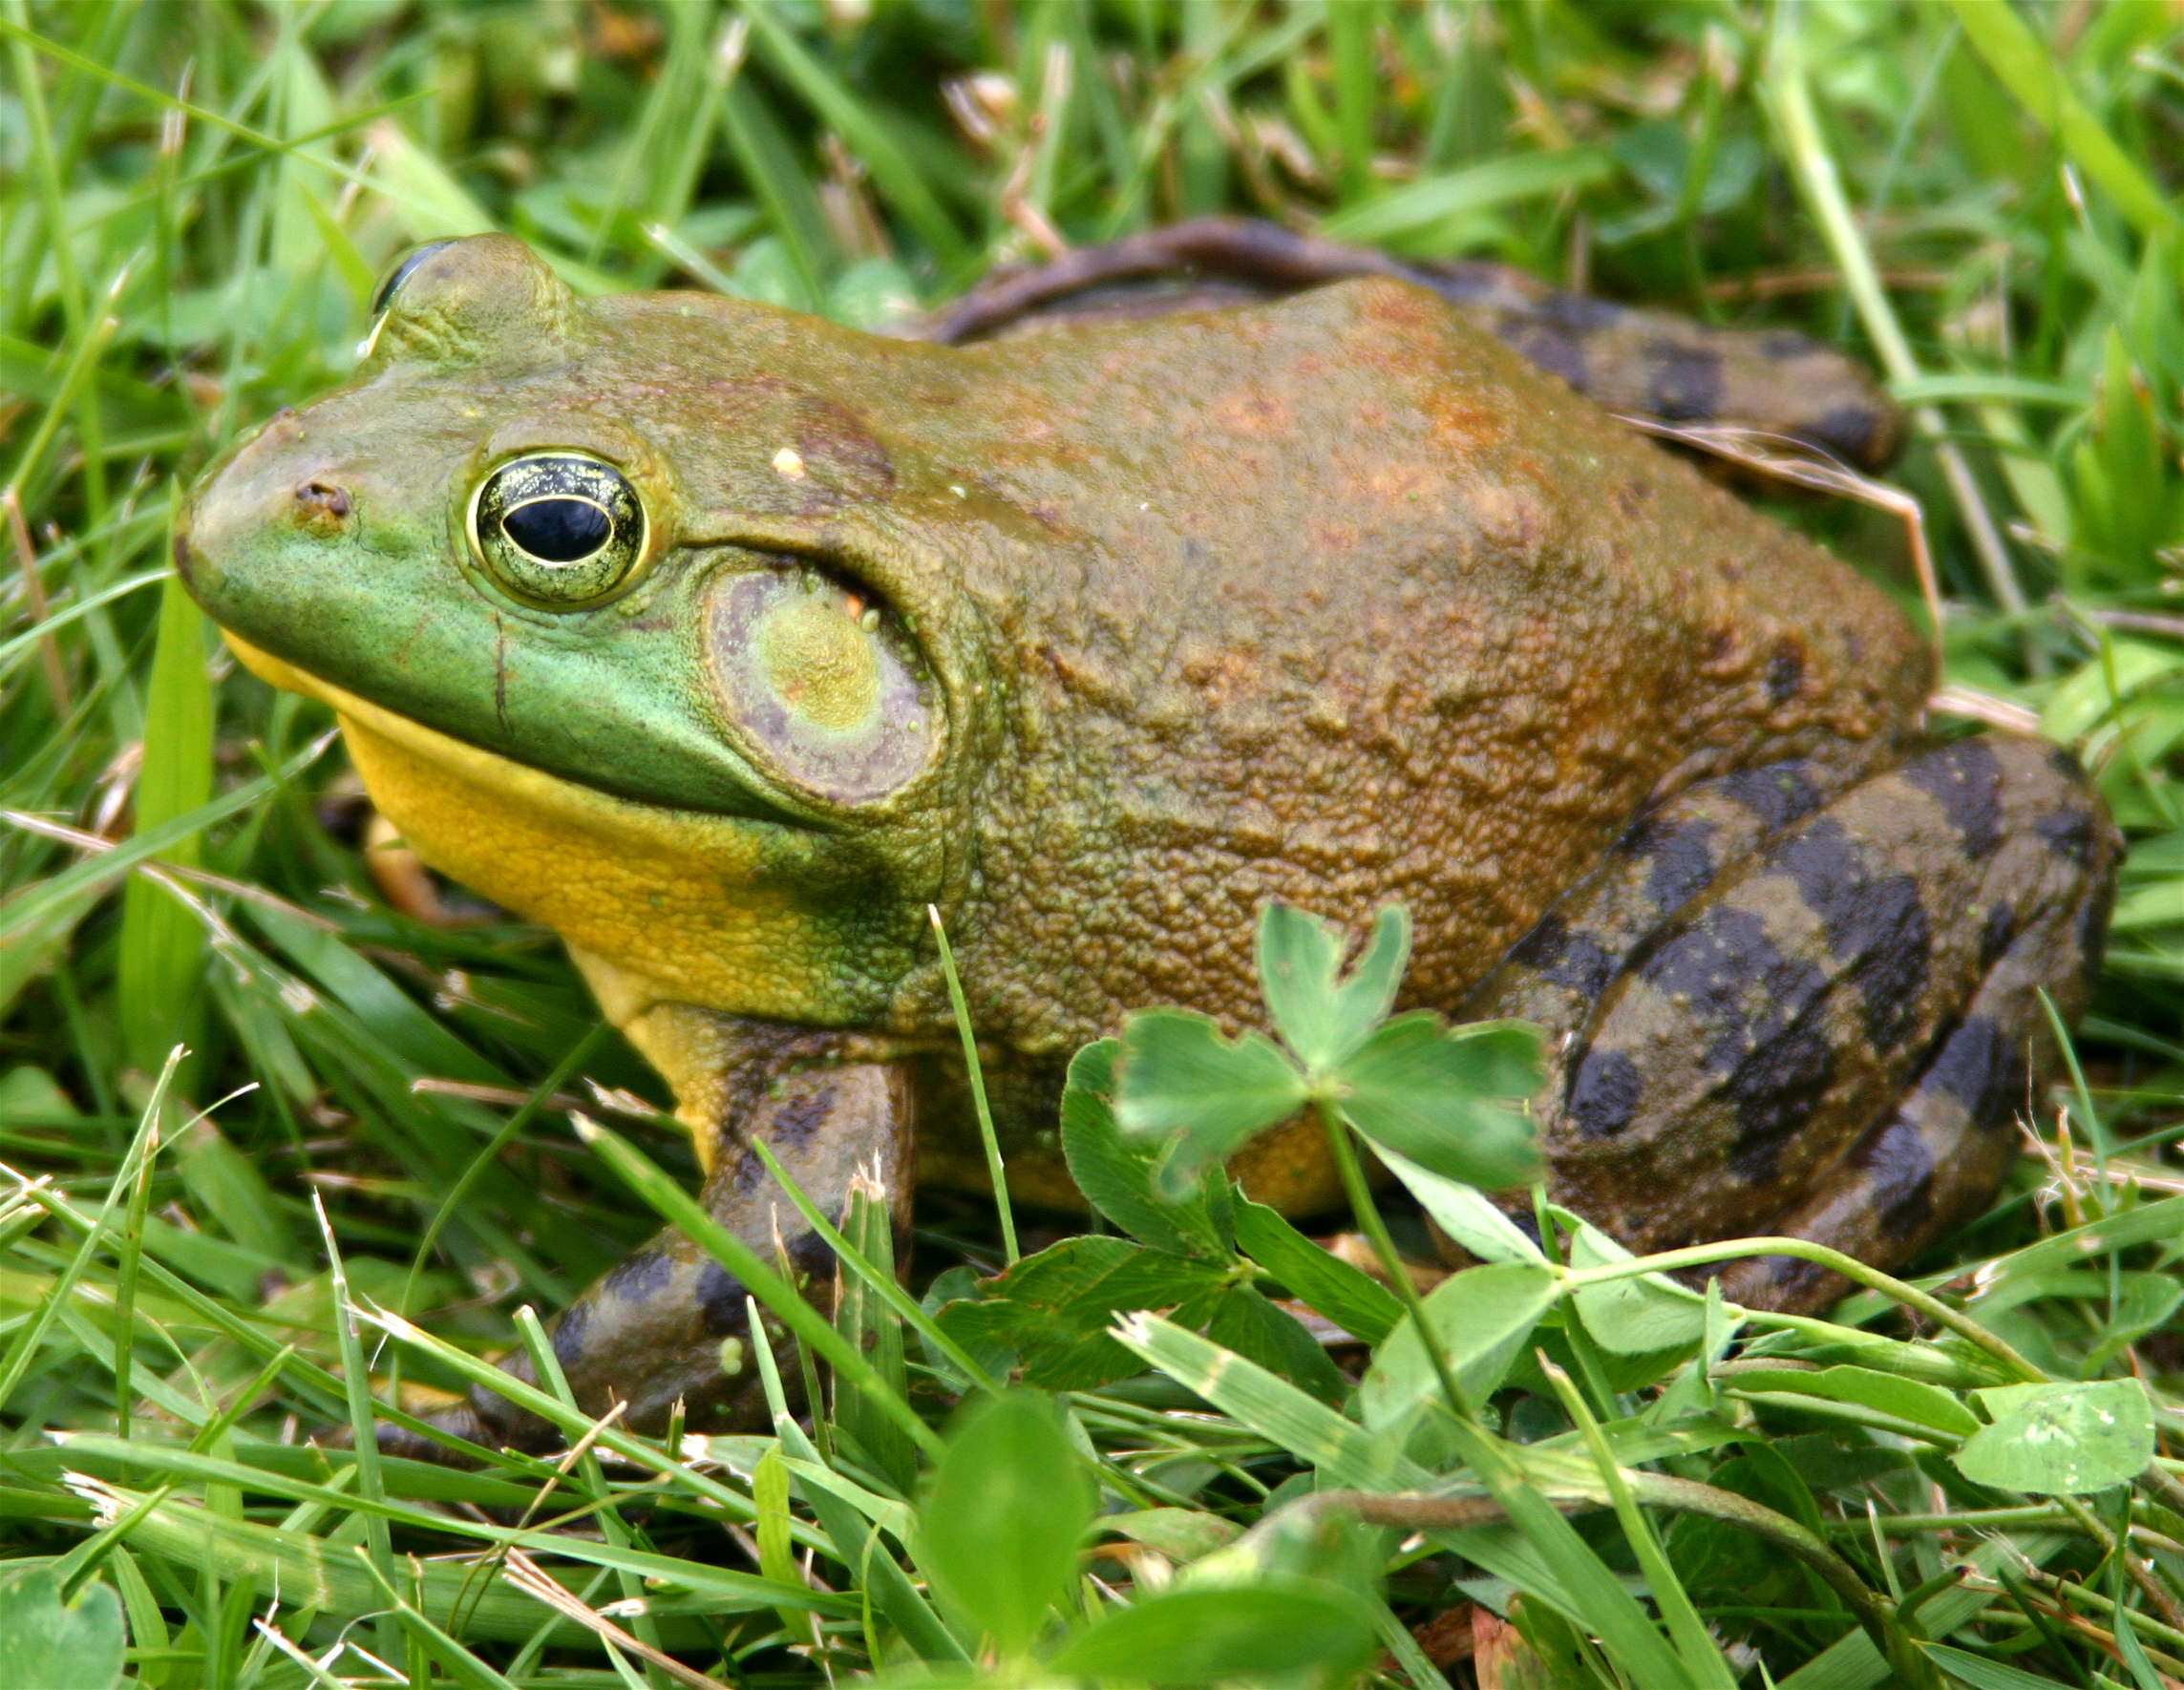 What do frogs have in their mouth that toads don't?